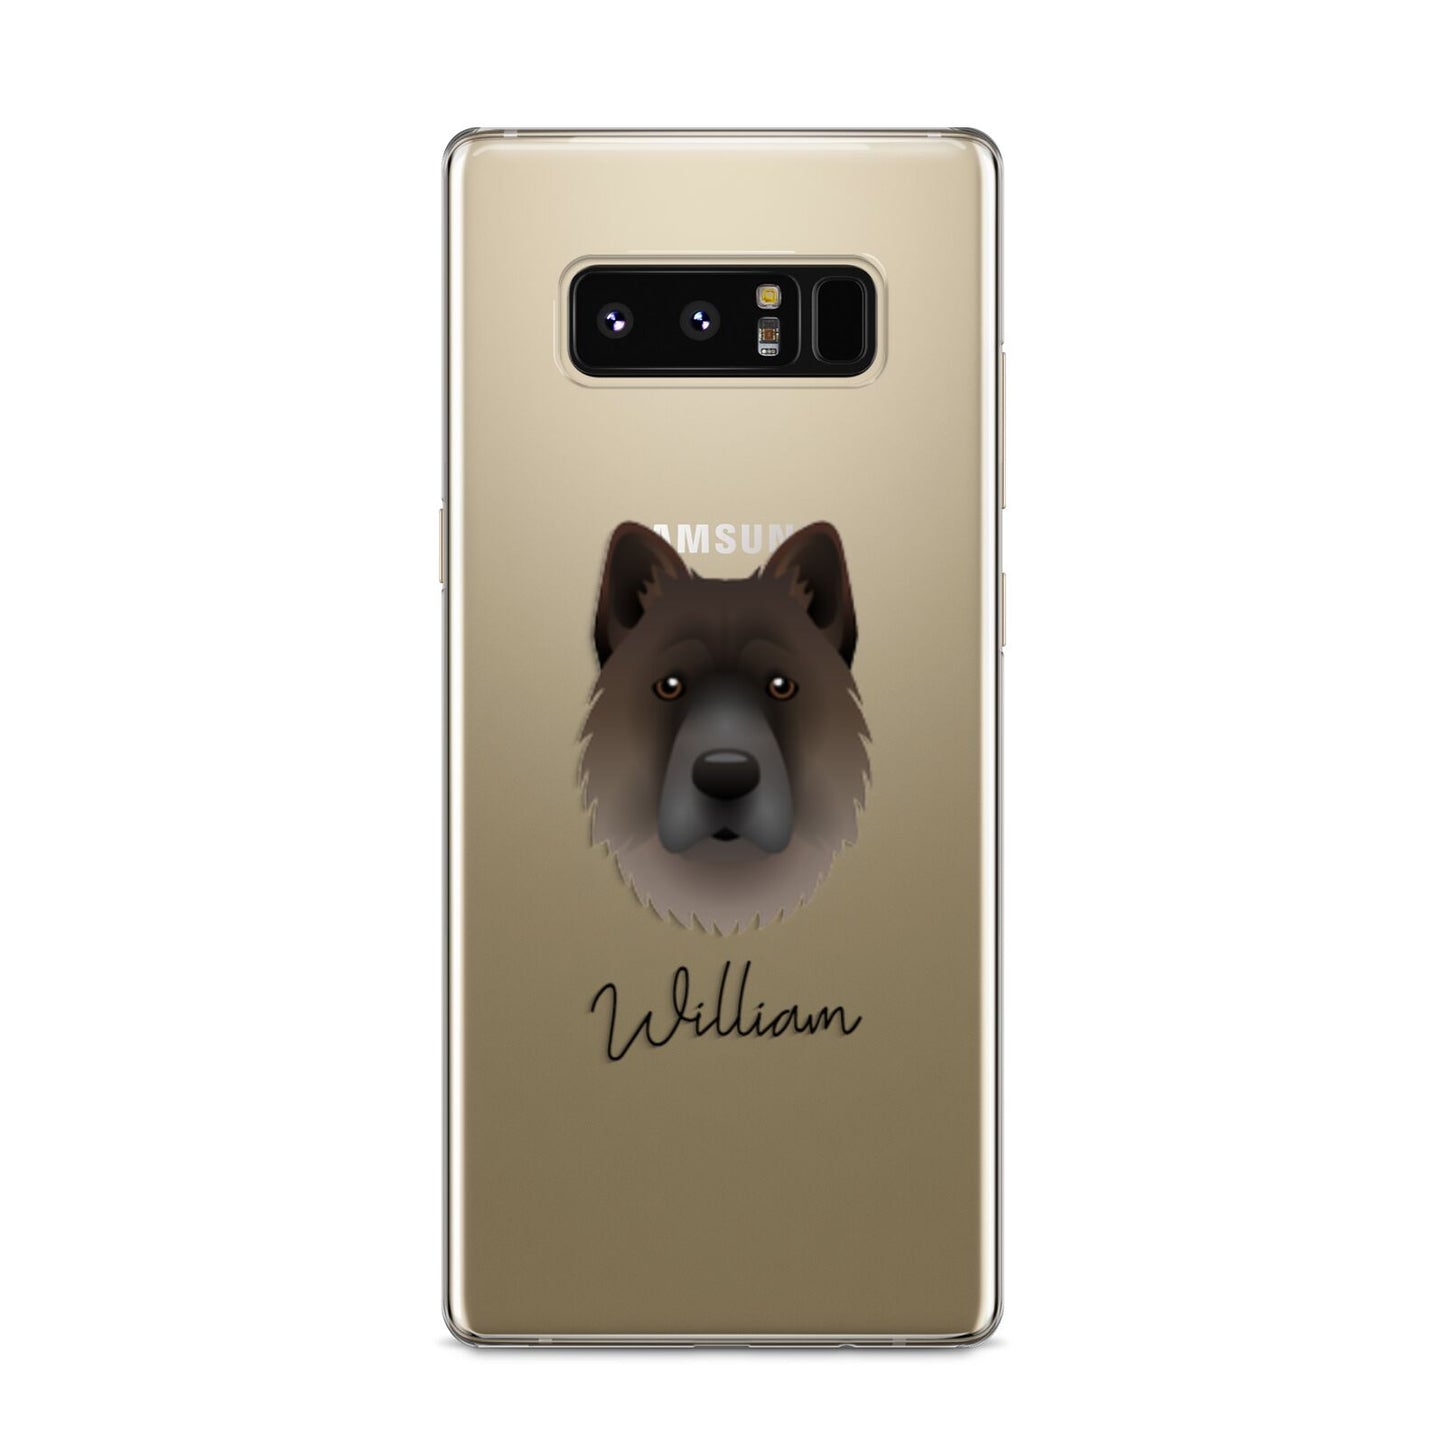 Chow Shepherd Personalised Samsung Galaxy S8 Case